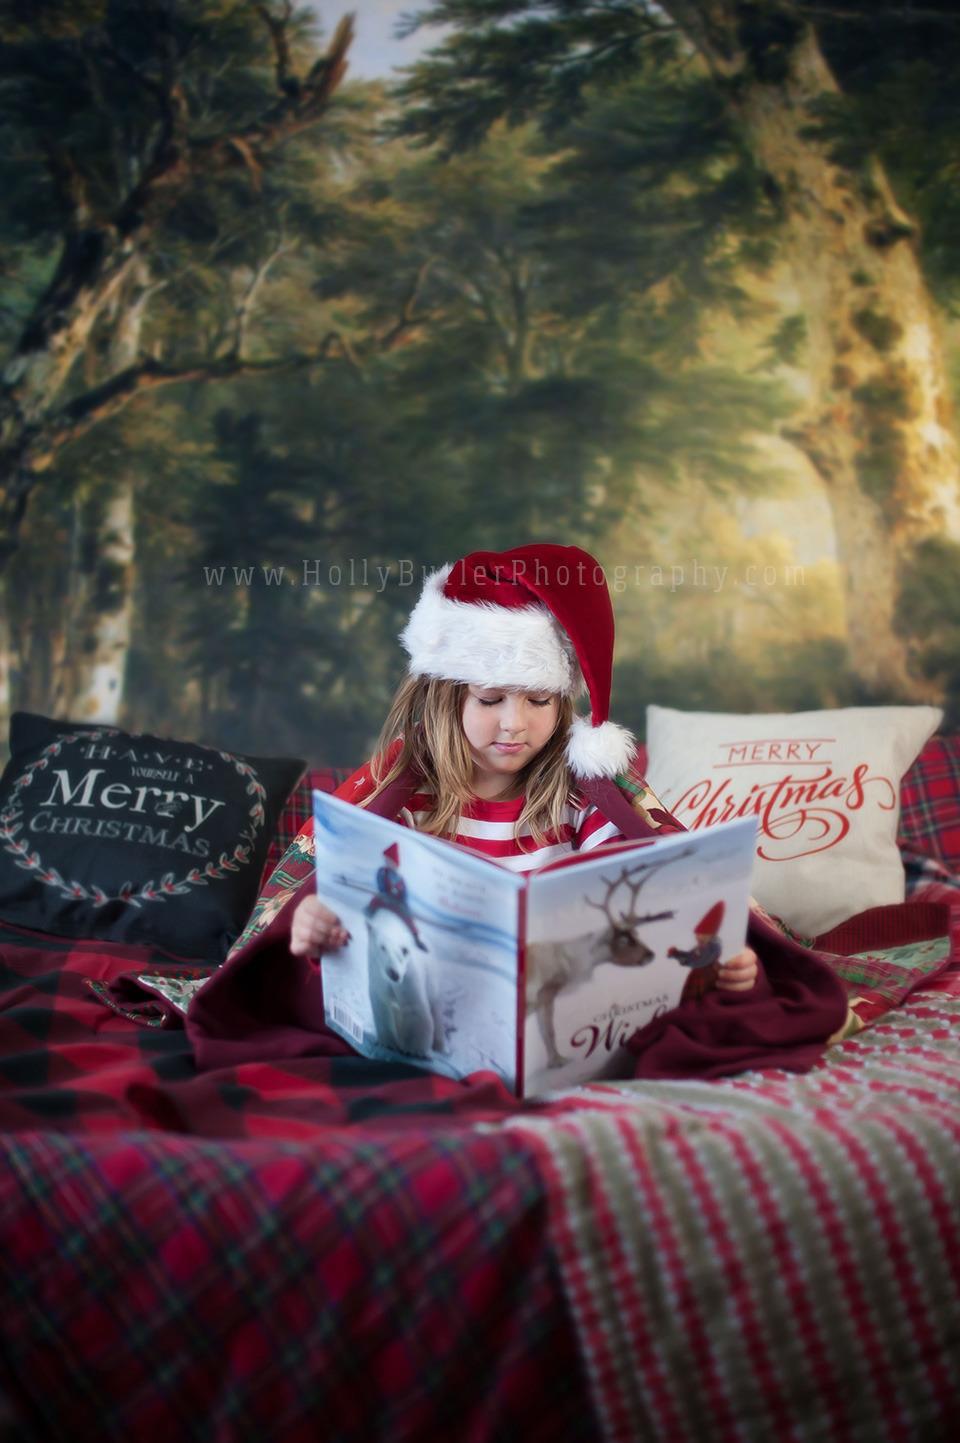 Katebackdrop：Kate Forest Old Green Trees Scenery Photography Backdrops for Christmas